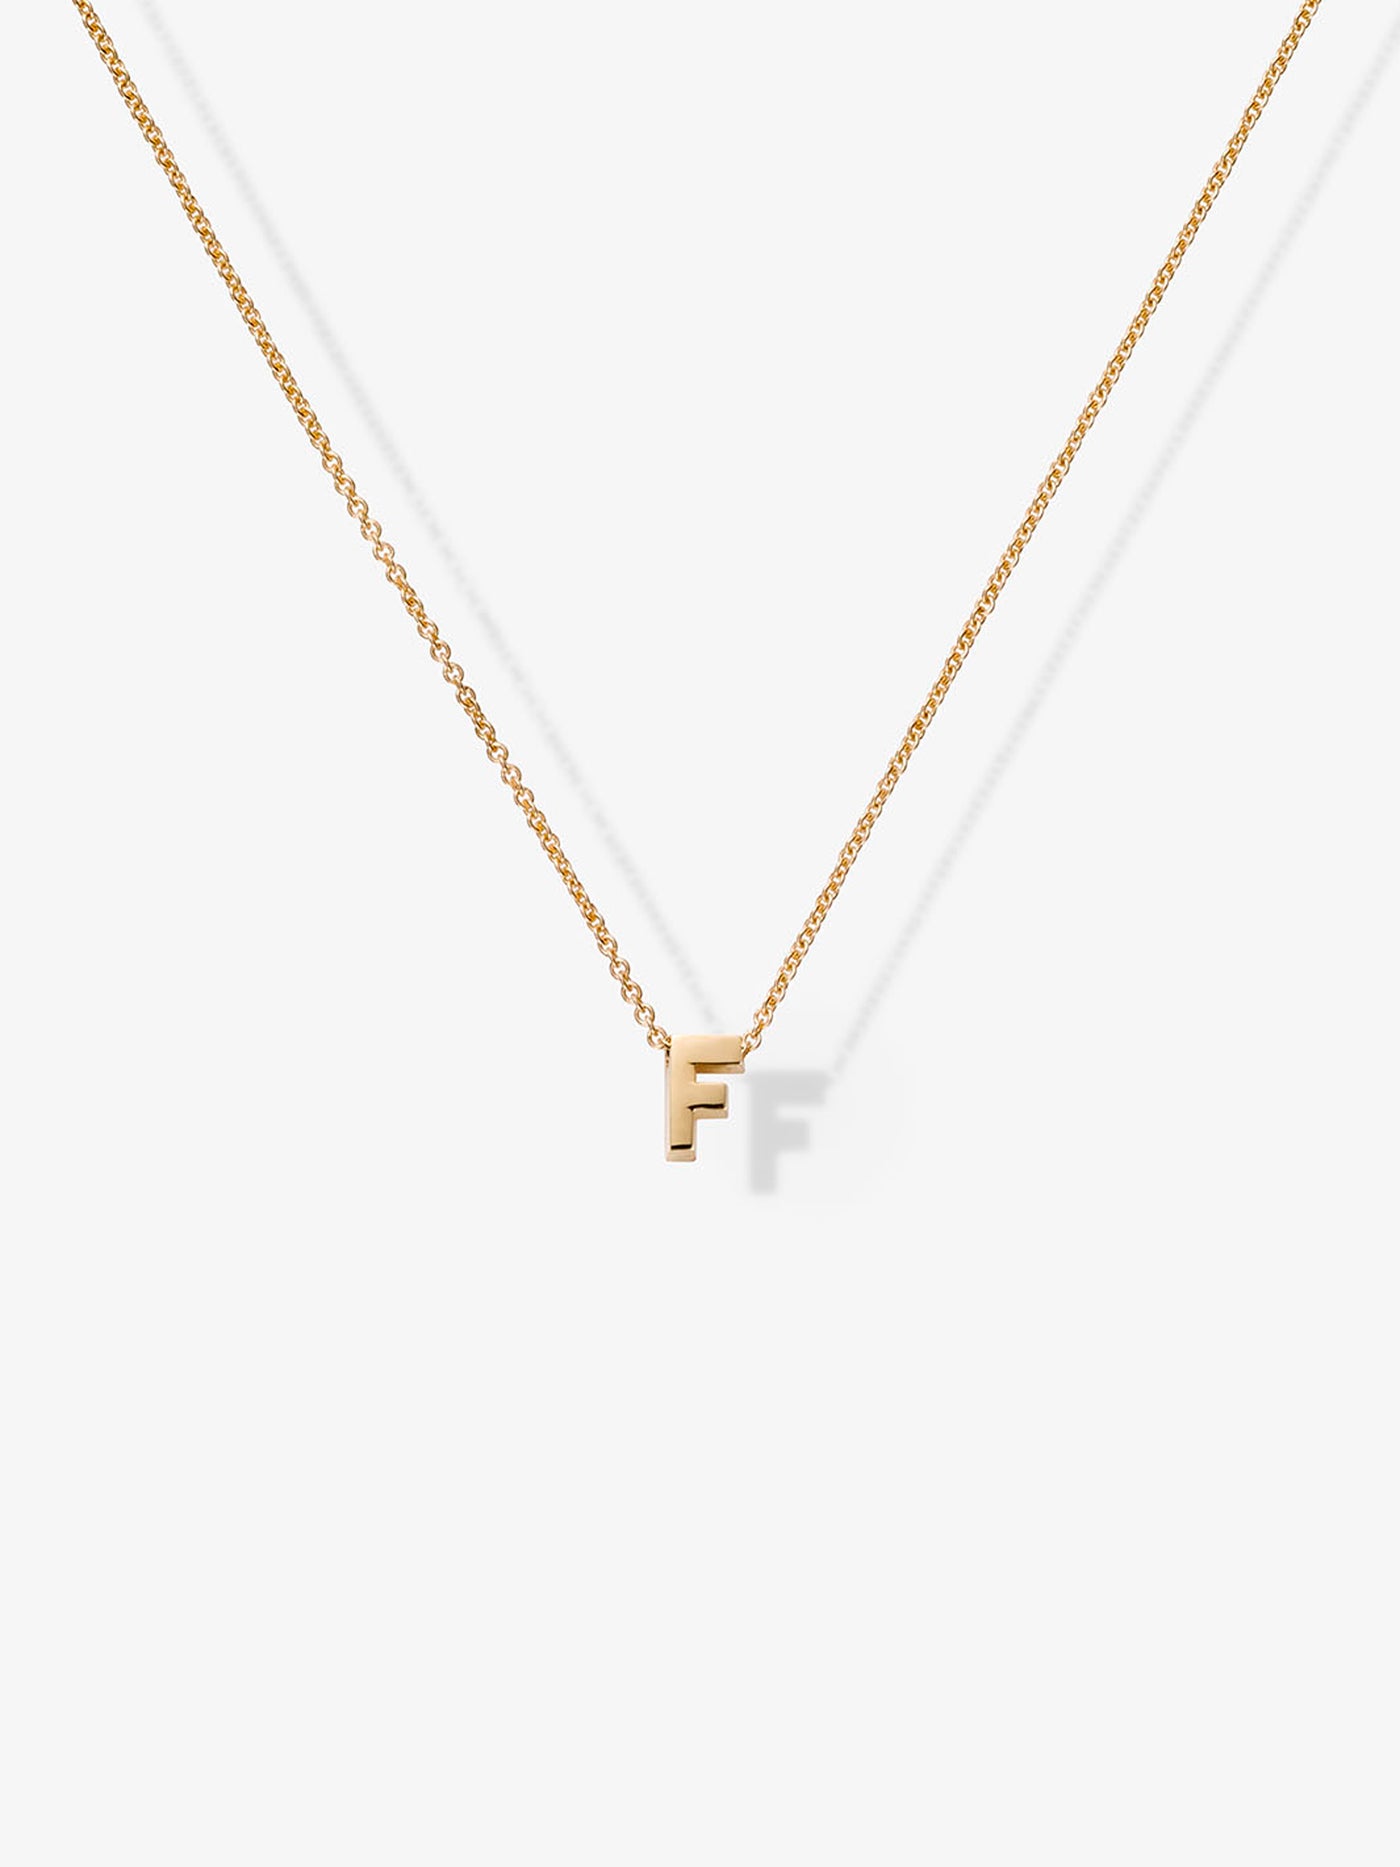 Letter F Necklace in 18k Gold